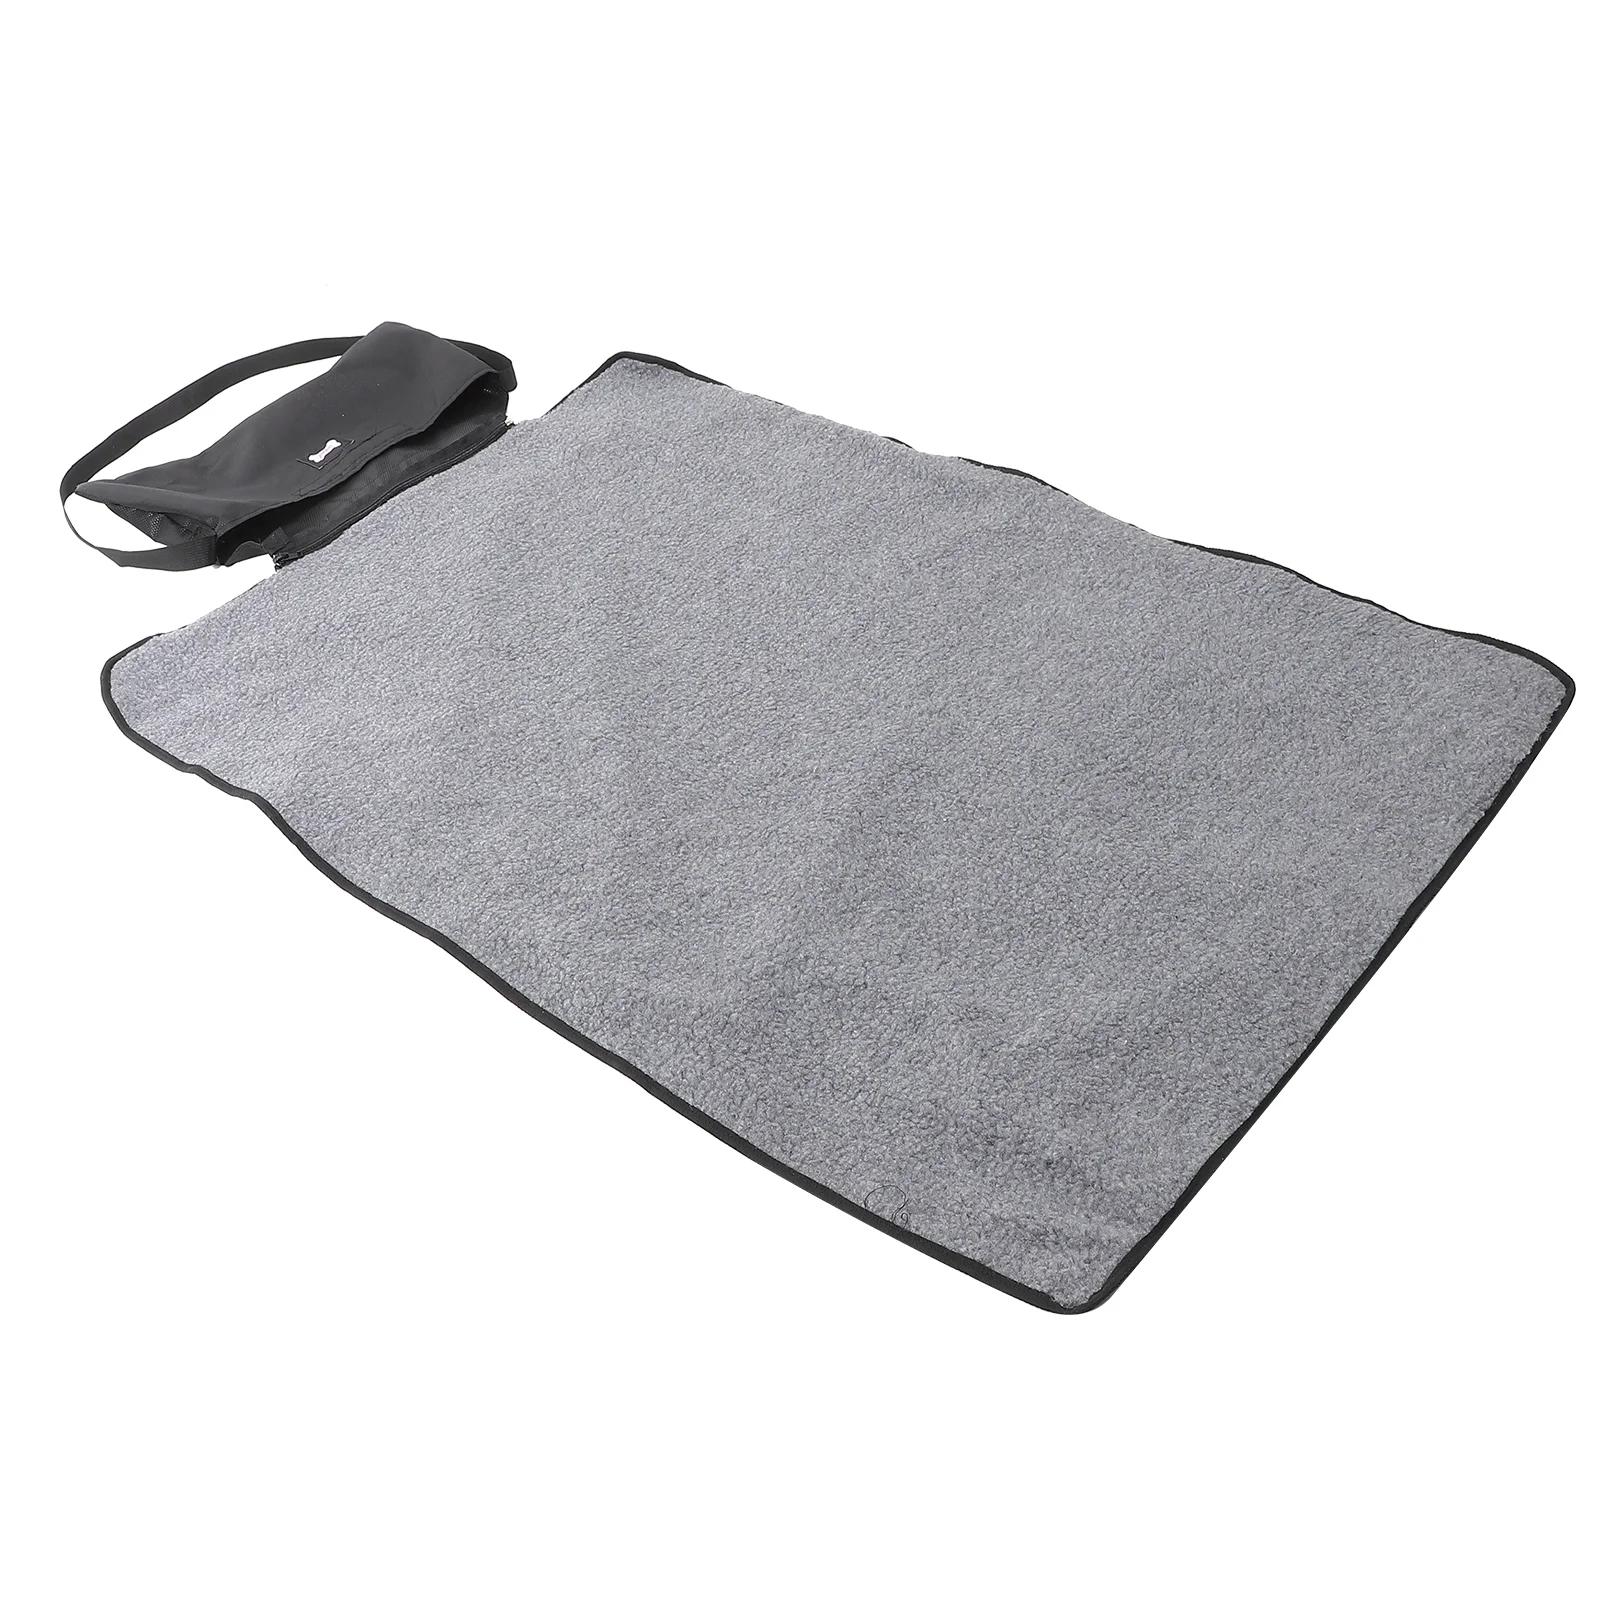 

Dog Mat Blanket Pet Outdoor Bed Car Accessories Cat Foldable Pad Camping Sleeping Fleece Travel Crate Dogs Pets Roll Portable